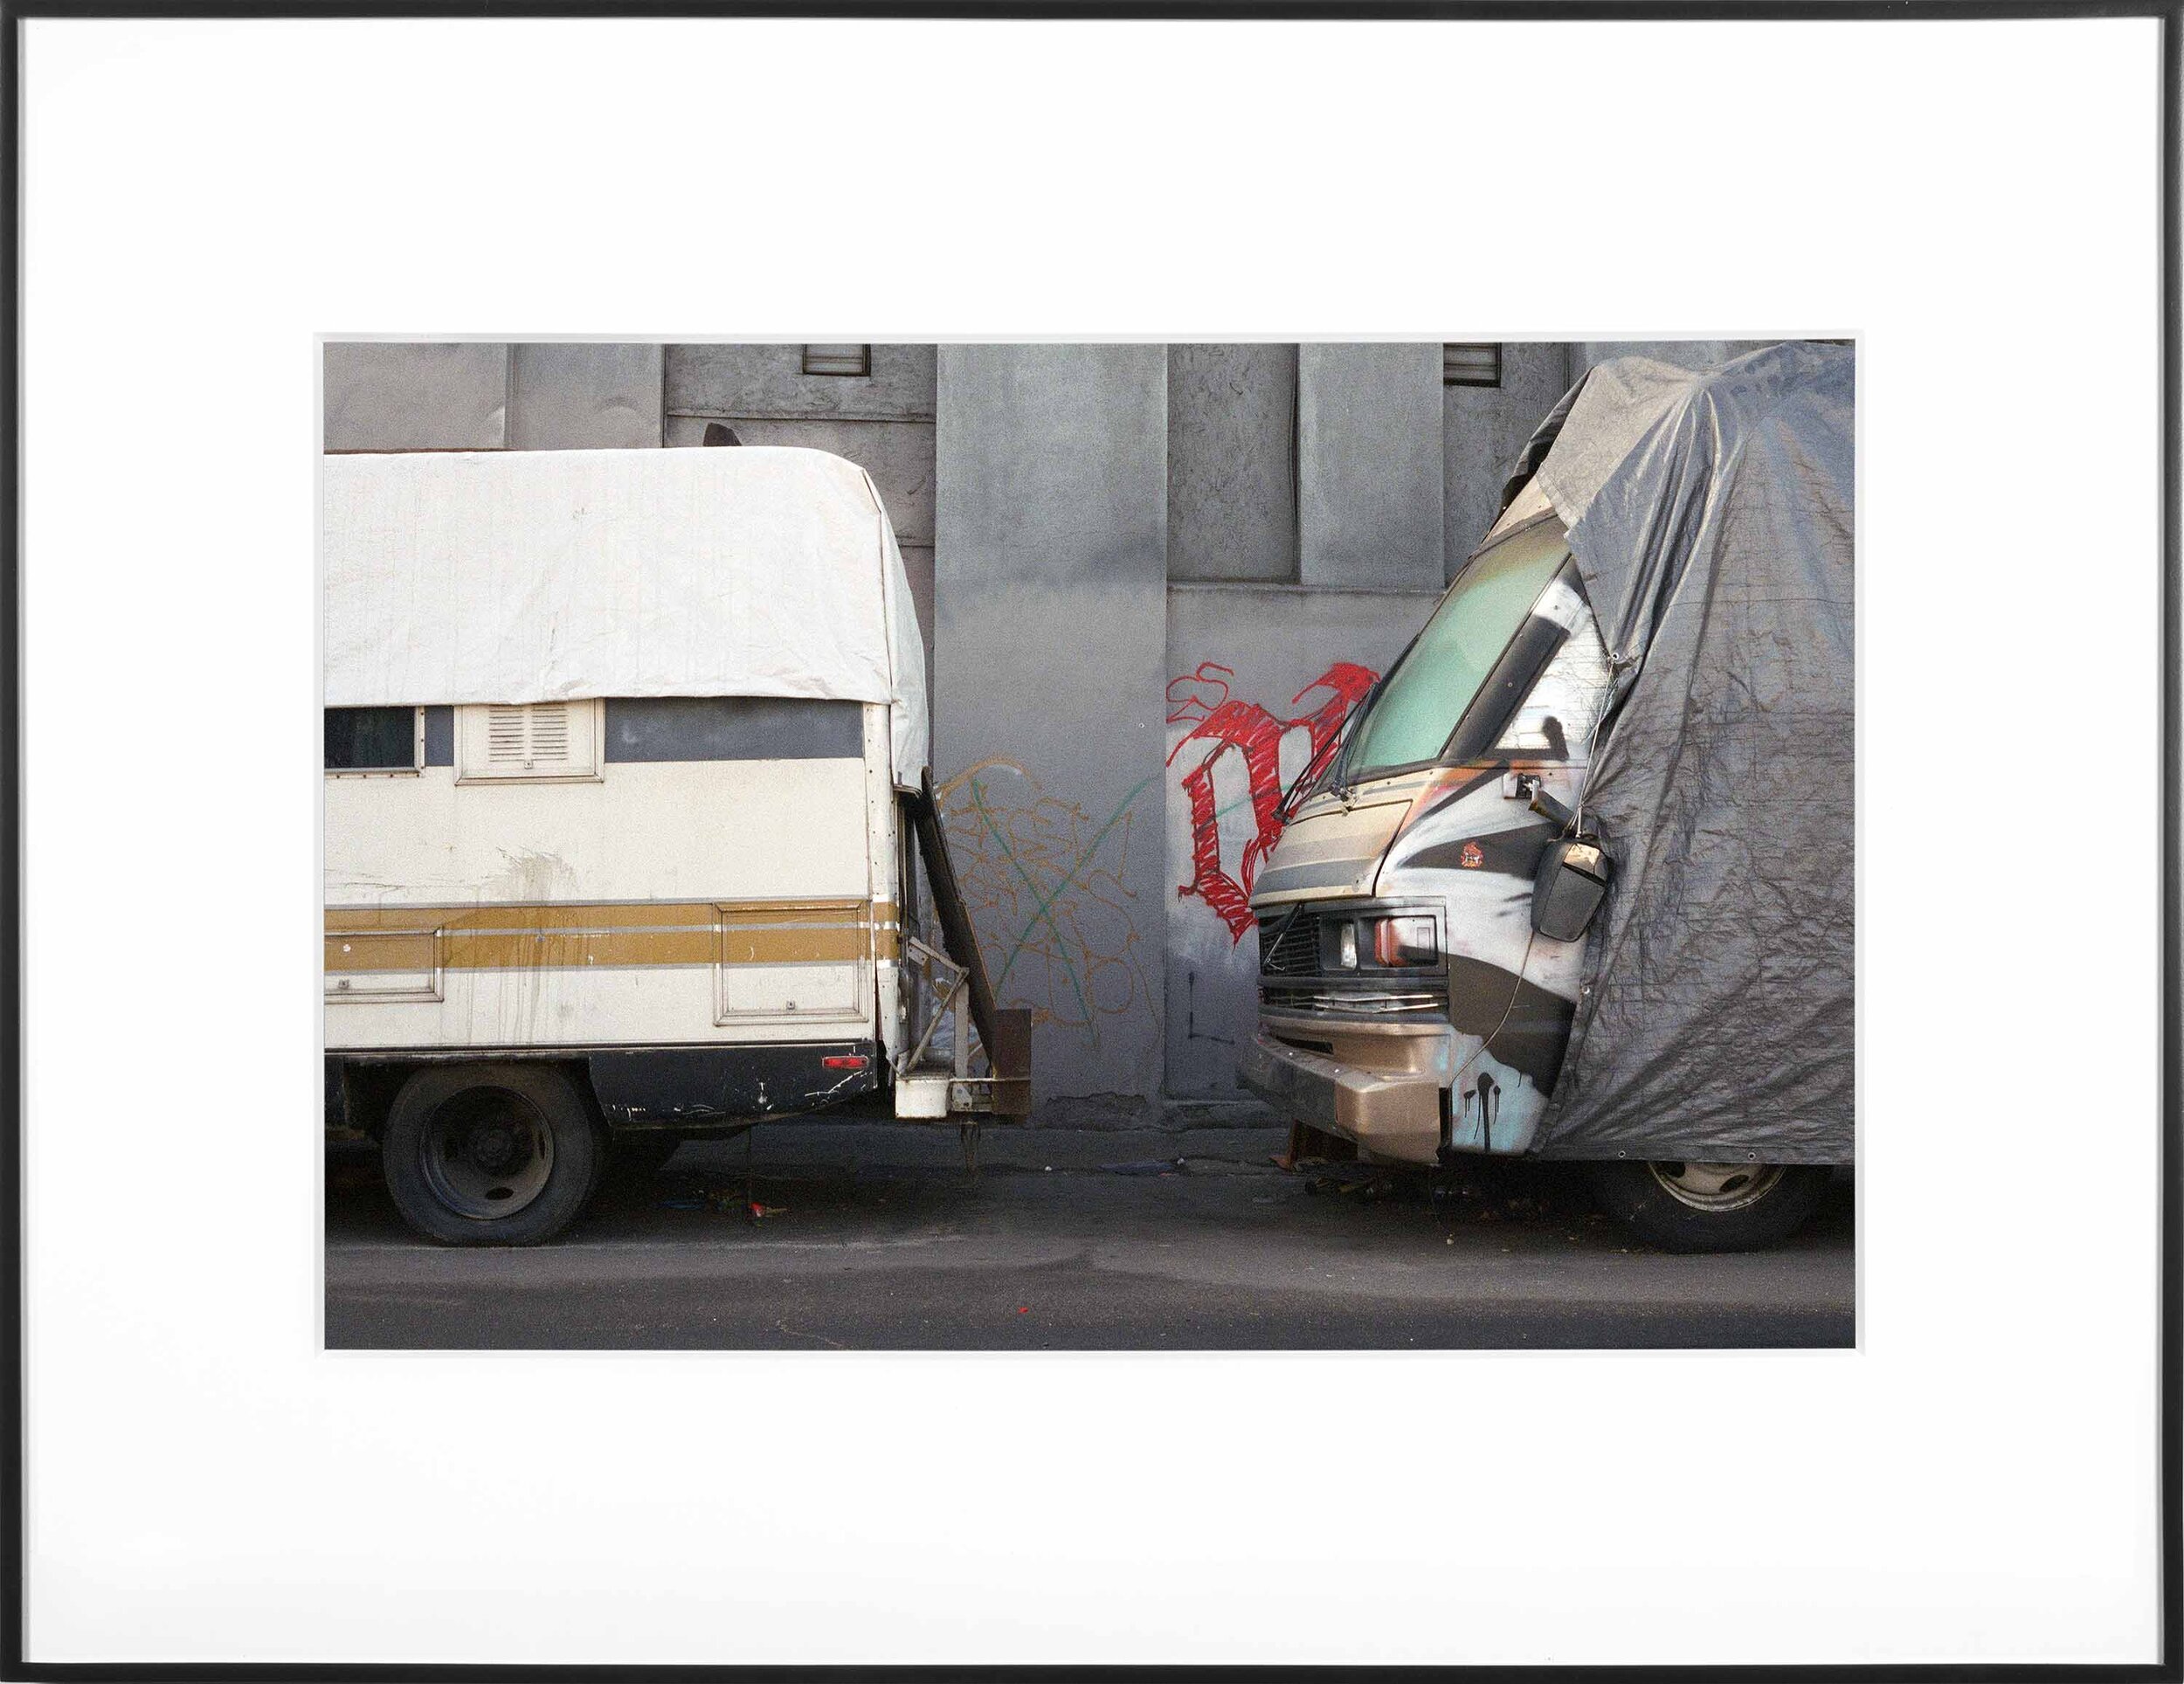   (Temporary) Homes for America: 3300 block to 4400 block, Union Pacific Avenue, between South Grande Vista Avenue and South Marianna Avenue, Los Angeles/Commerce, California, December 2020   2021  chromogenic print  11 x 15 inches  Exhibition:   For